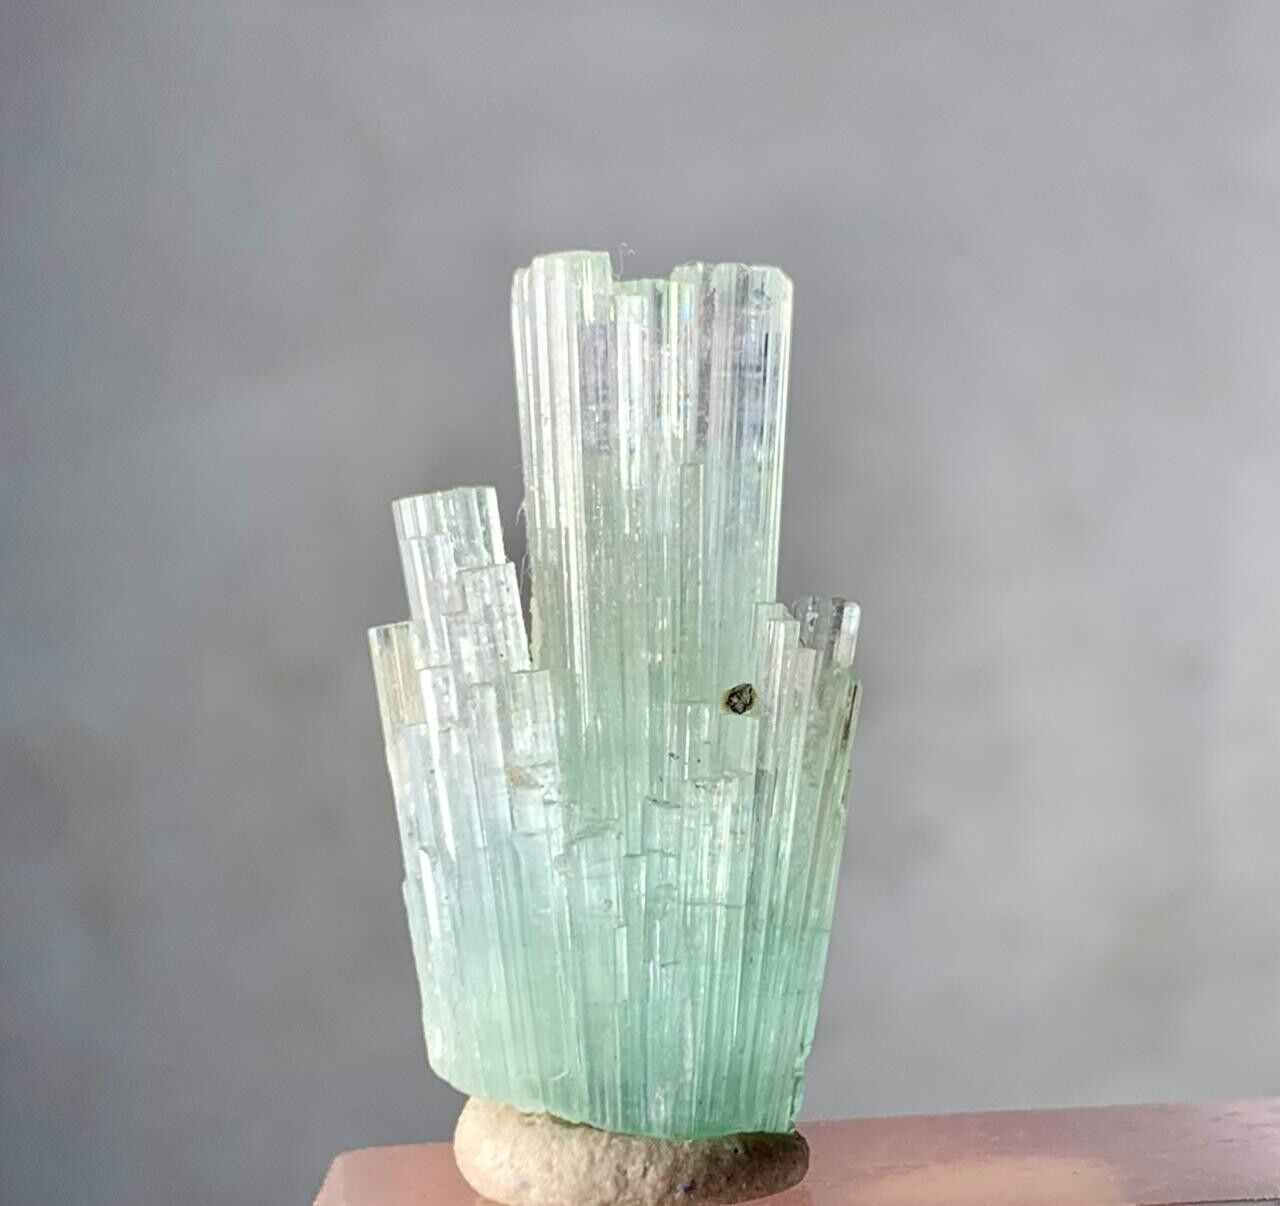 27 Ct Tourmaline Crystals Bunch From Afghanistan